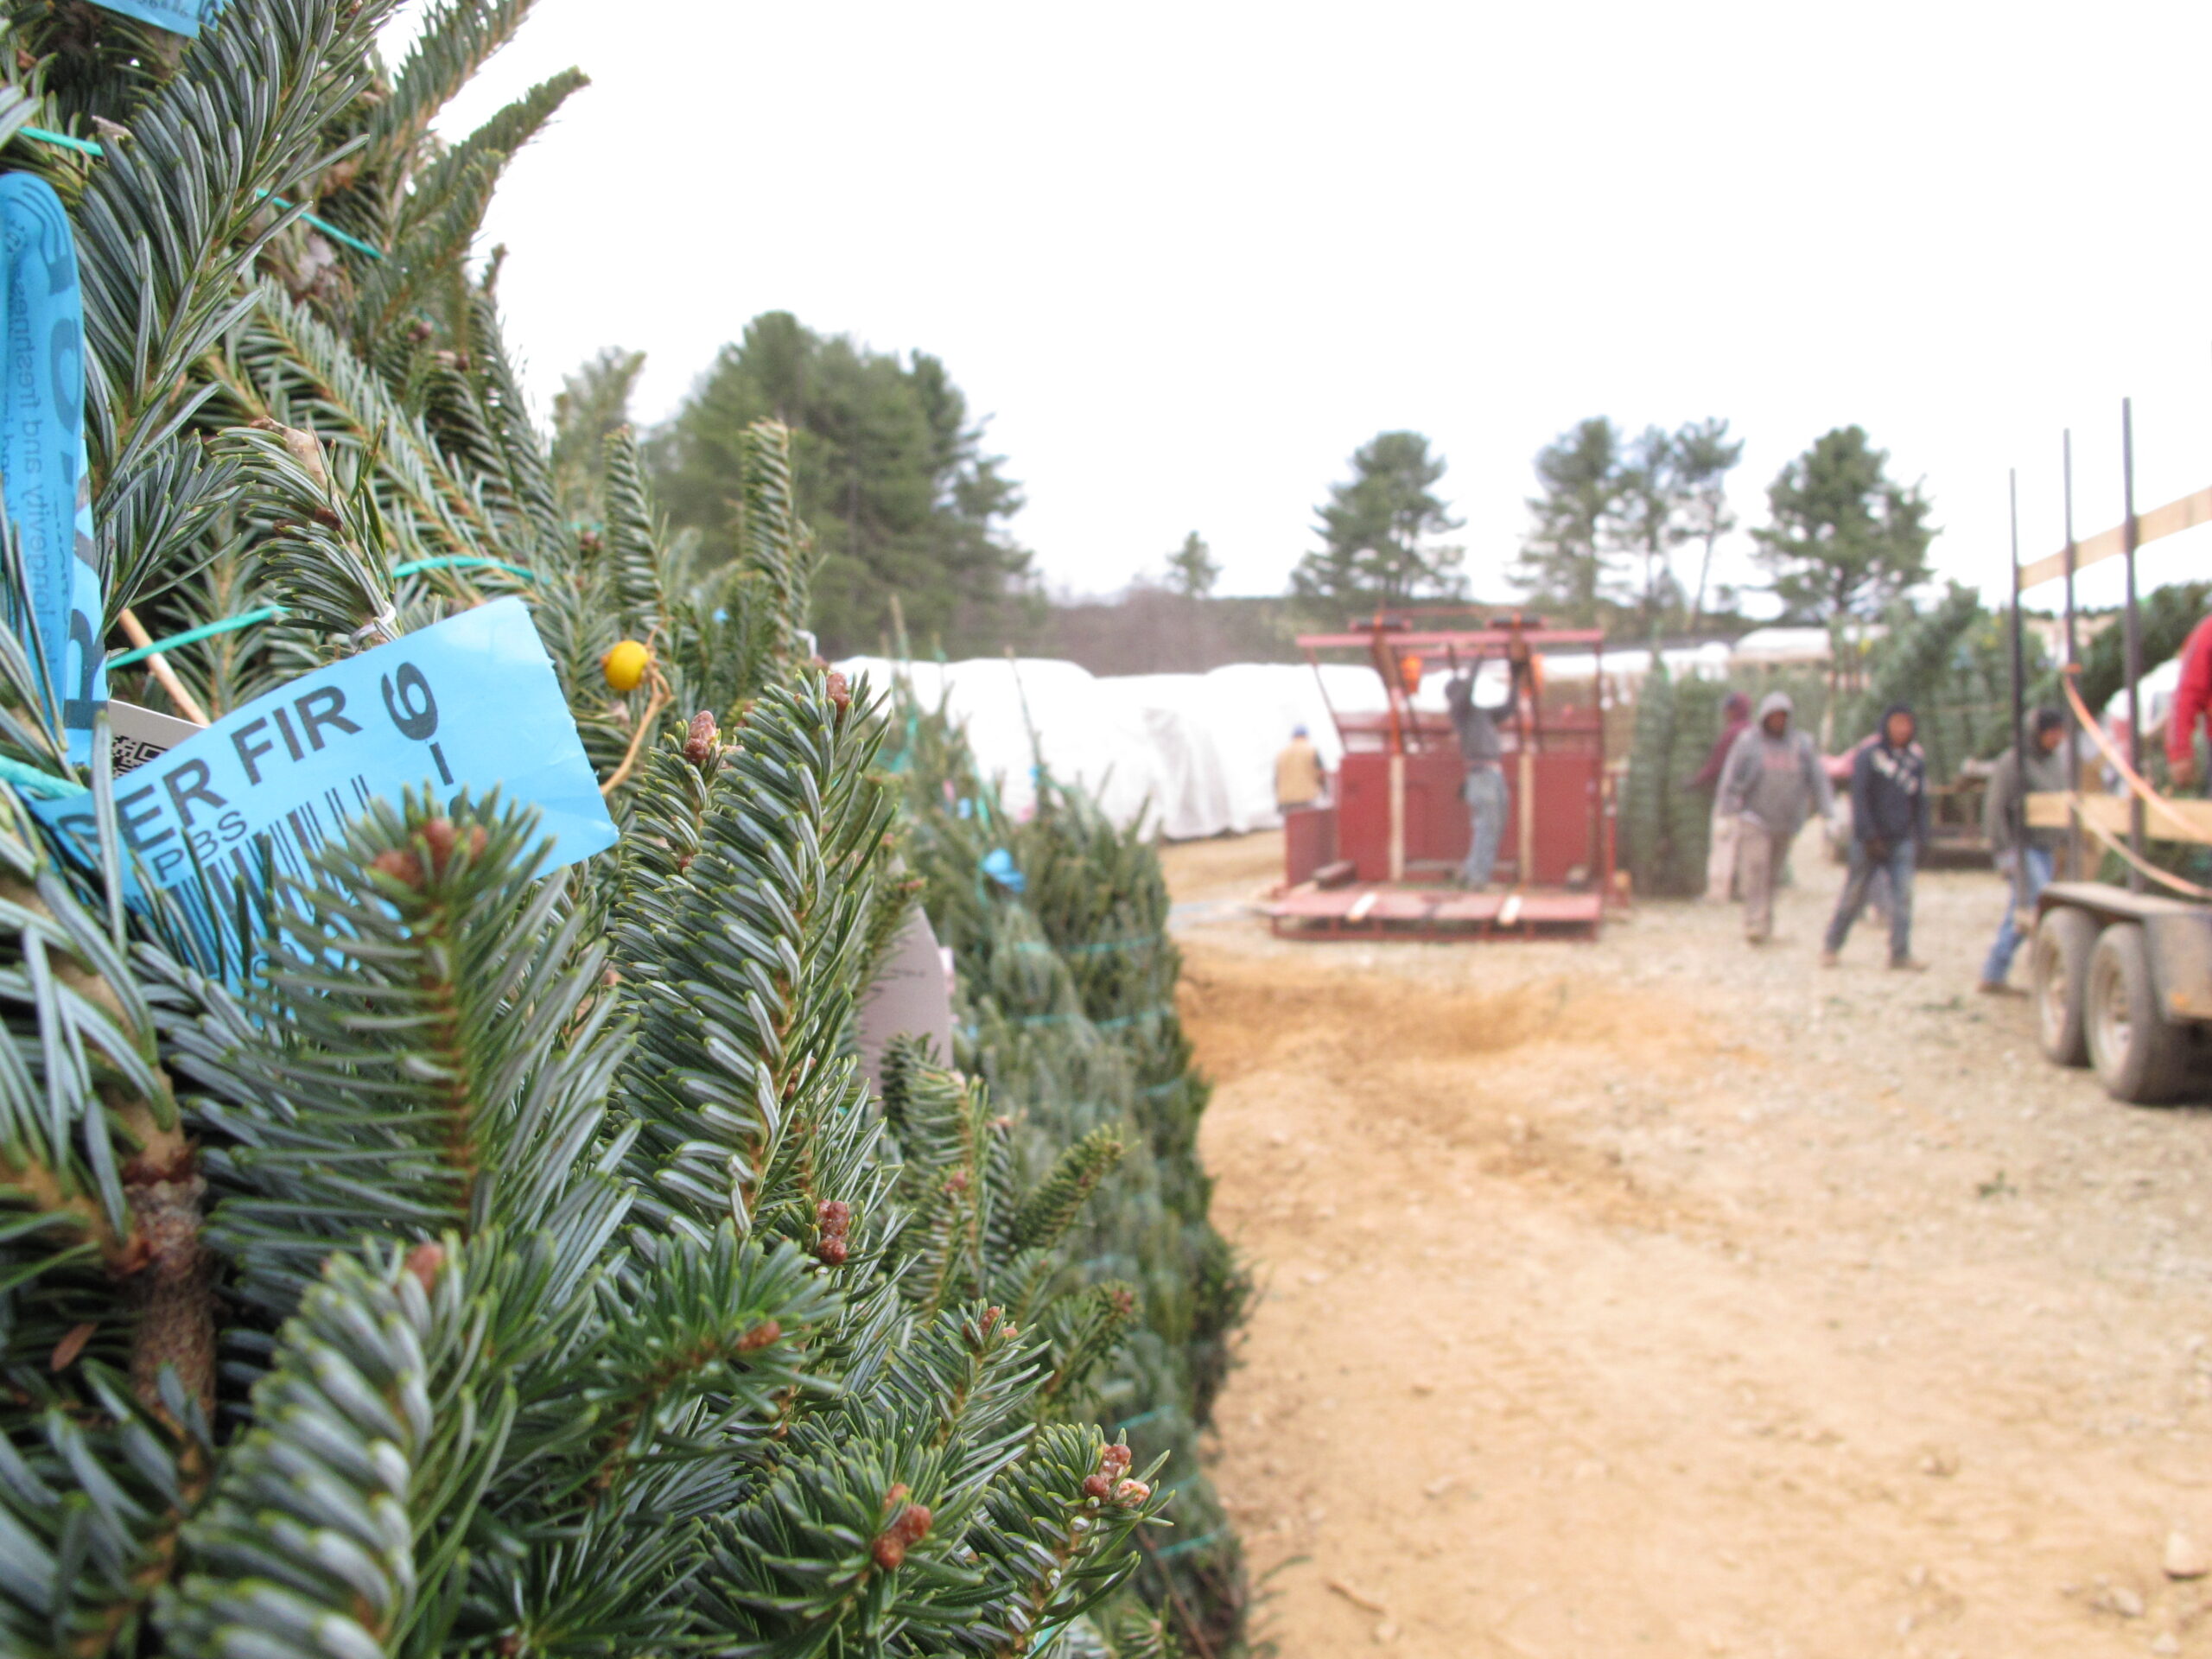 Workers sort Christmas trees for shipping.